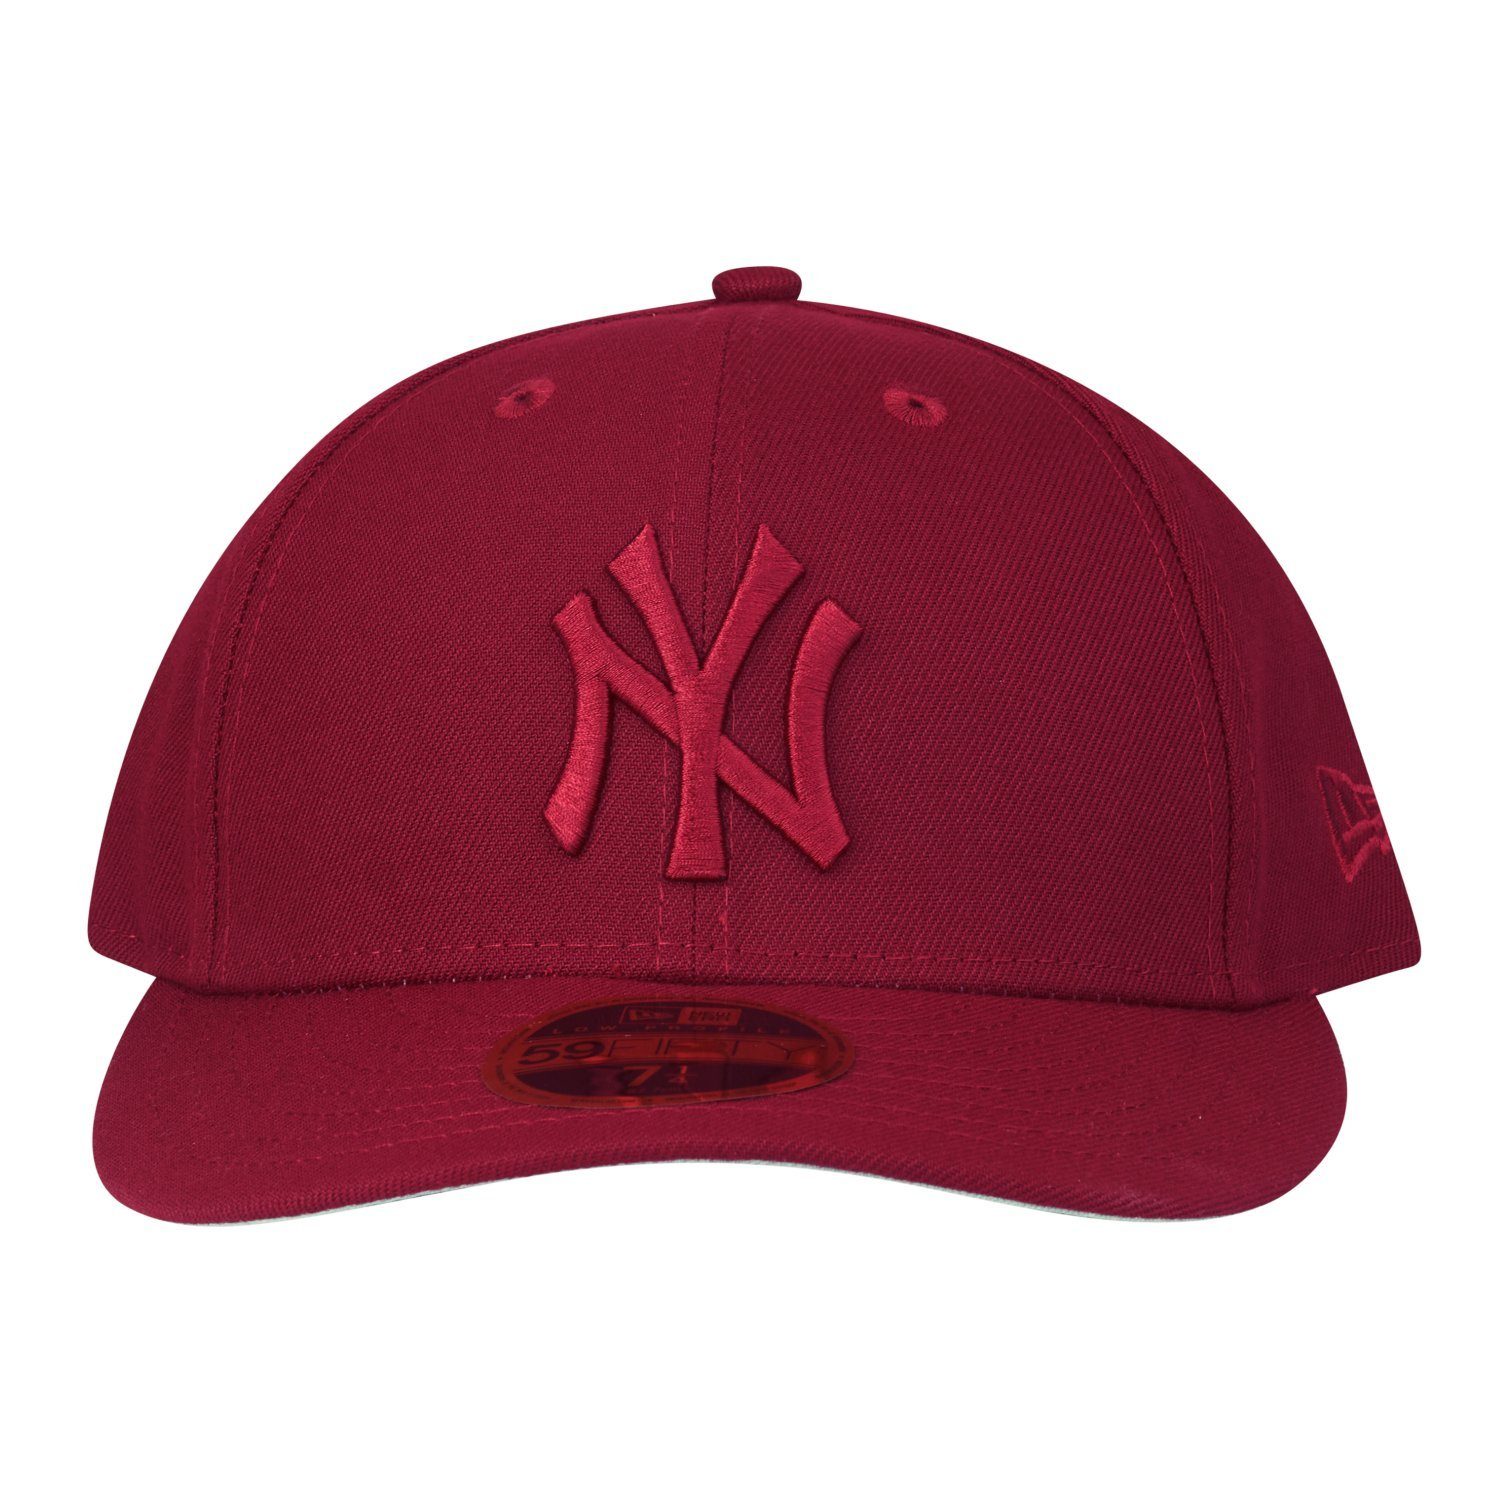 New Cap Low Yankees New Rot Profile Fitted 59Fifty Era York